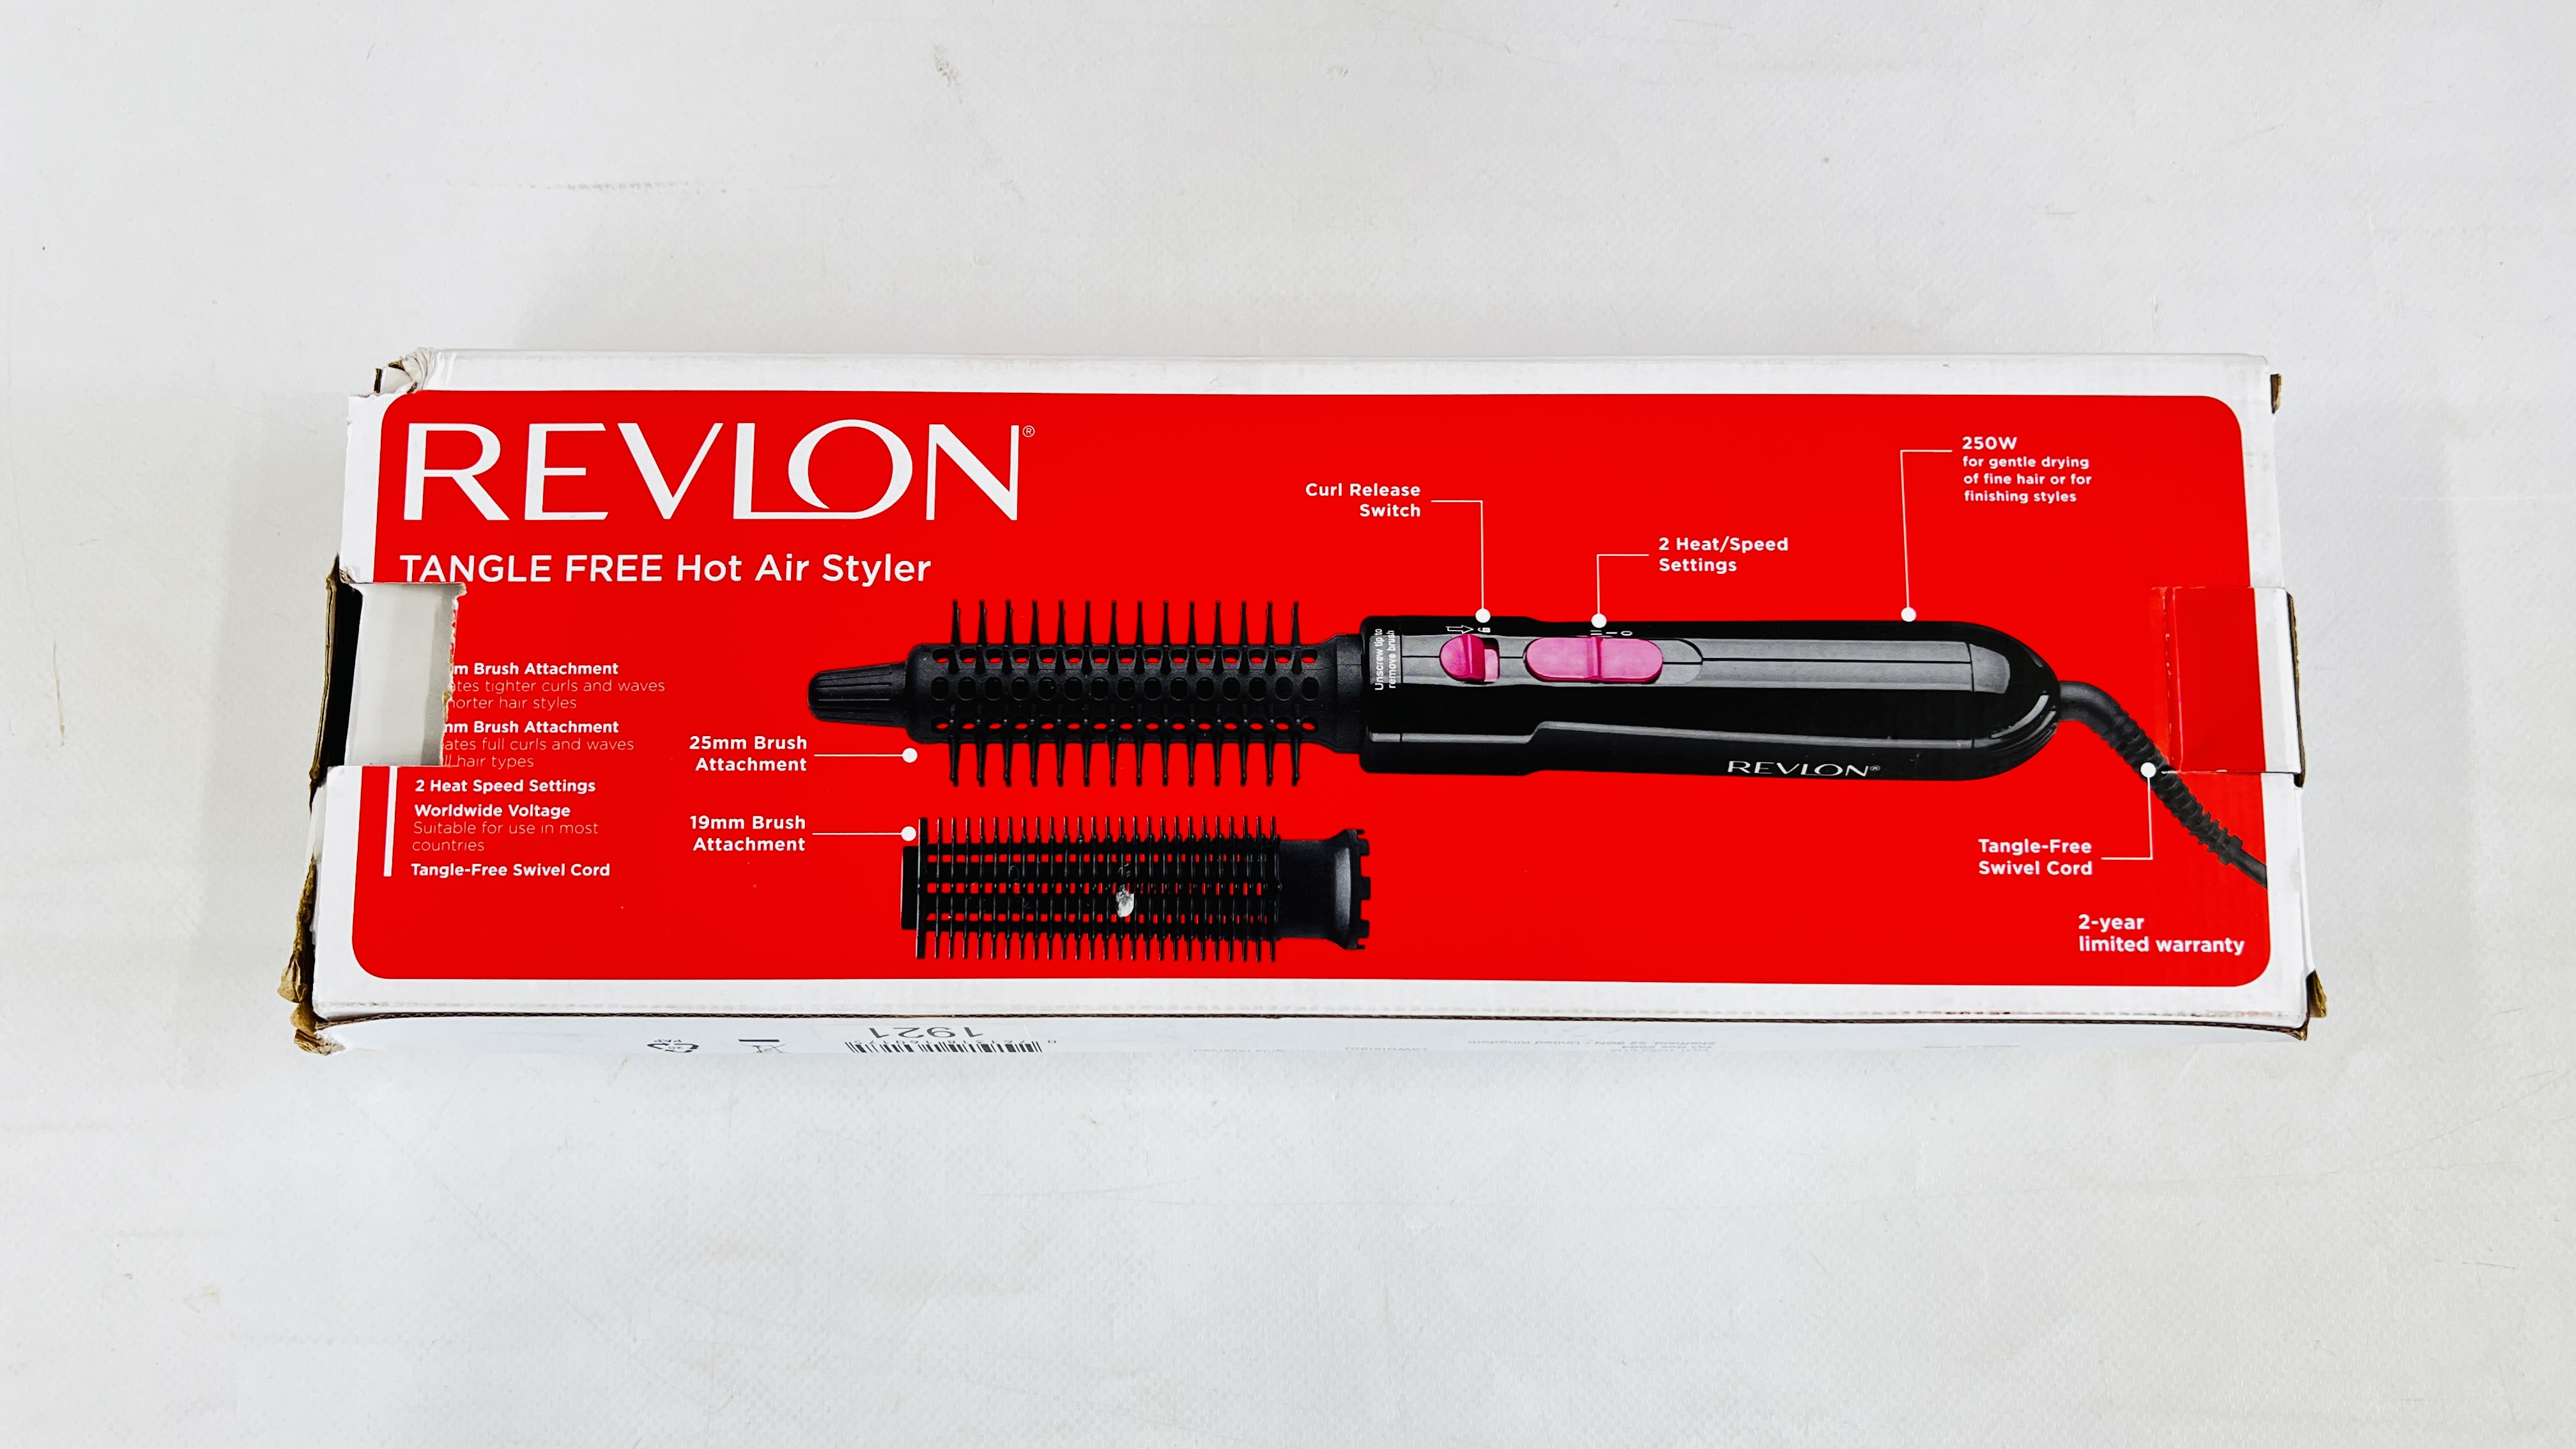 6 X REVLON TANGLE FREE HOT AIR STYLERS BOXED - SOLD AS SEEN. - Image 4 of 4